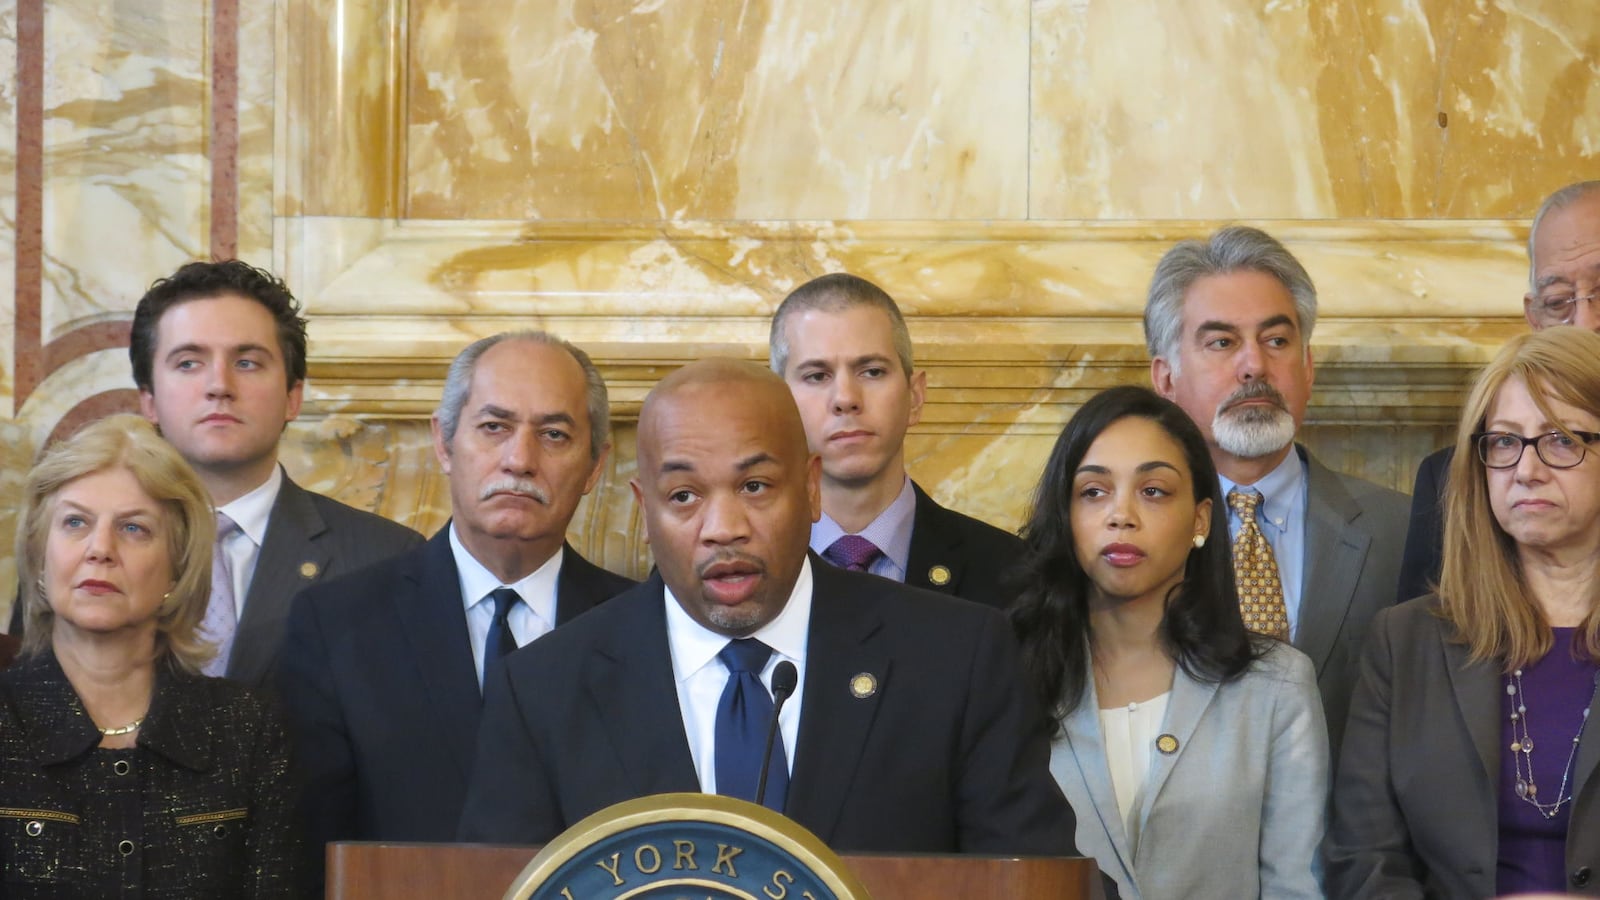 Assembly Speaker Carl Heastie at a 2015 press conference with Democratic colleagues